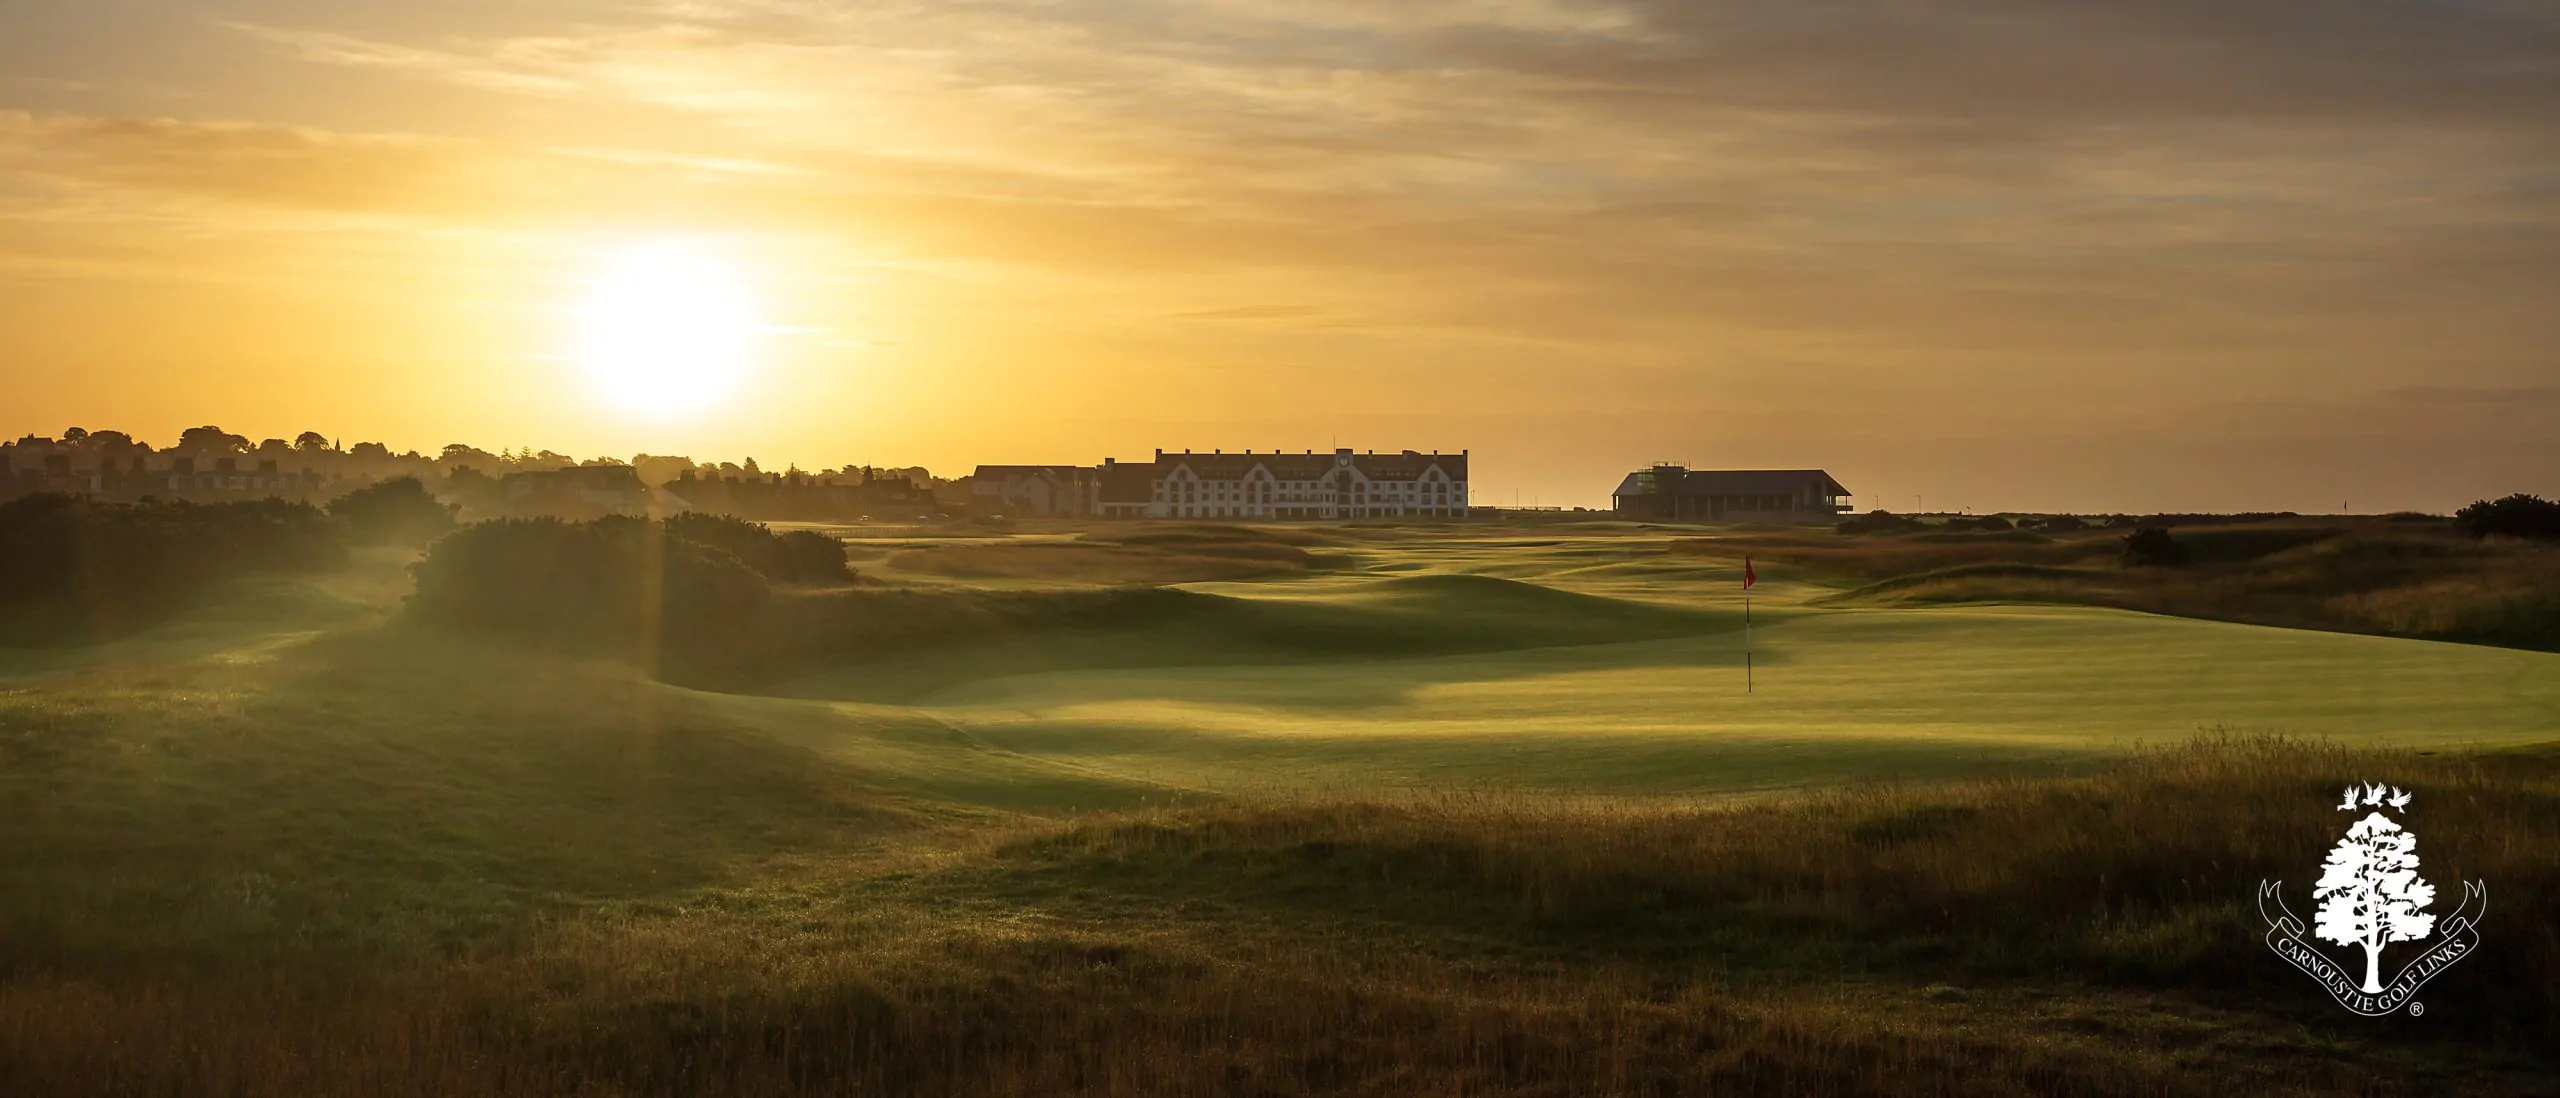 17  The Carnoustie Championship 17th Hole Island scaled